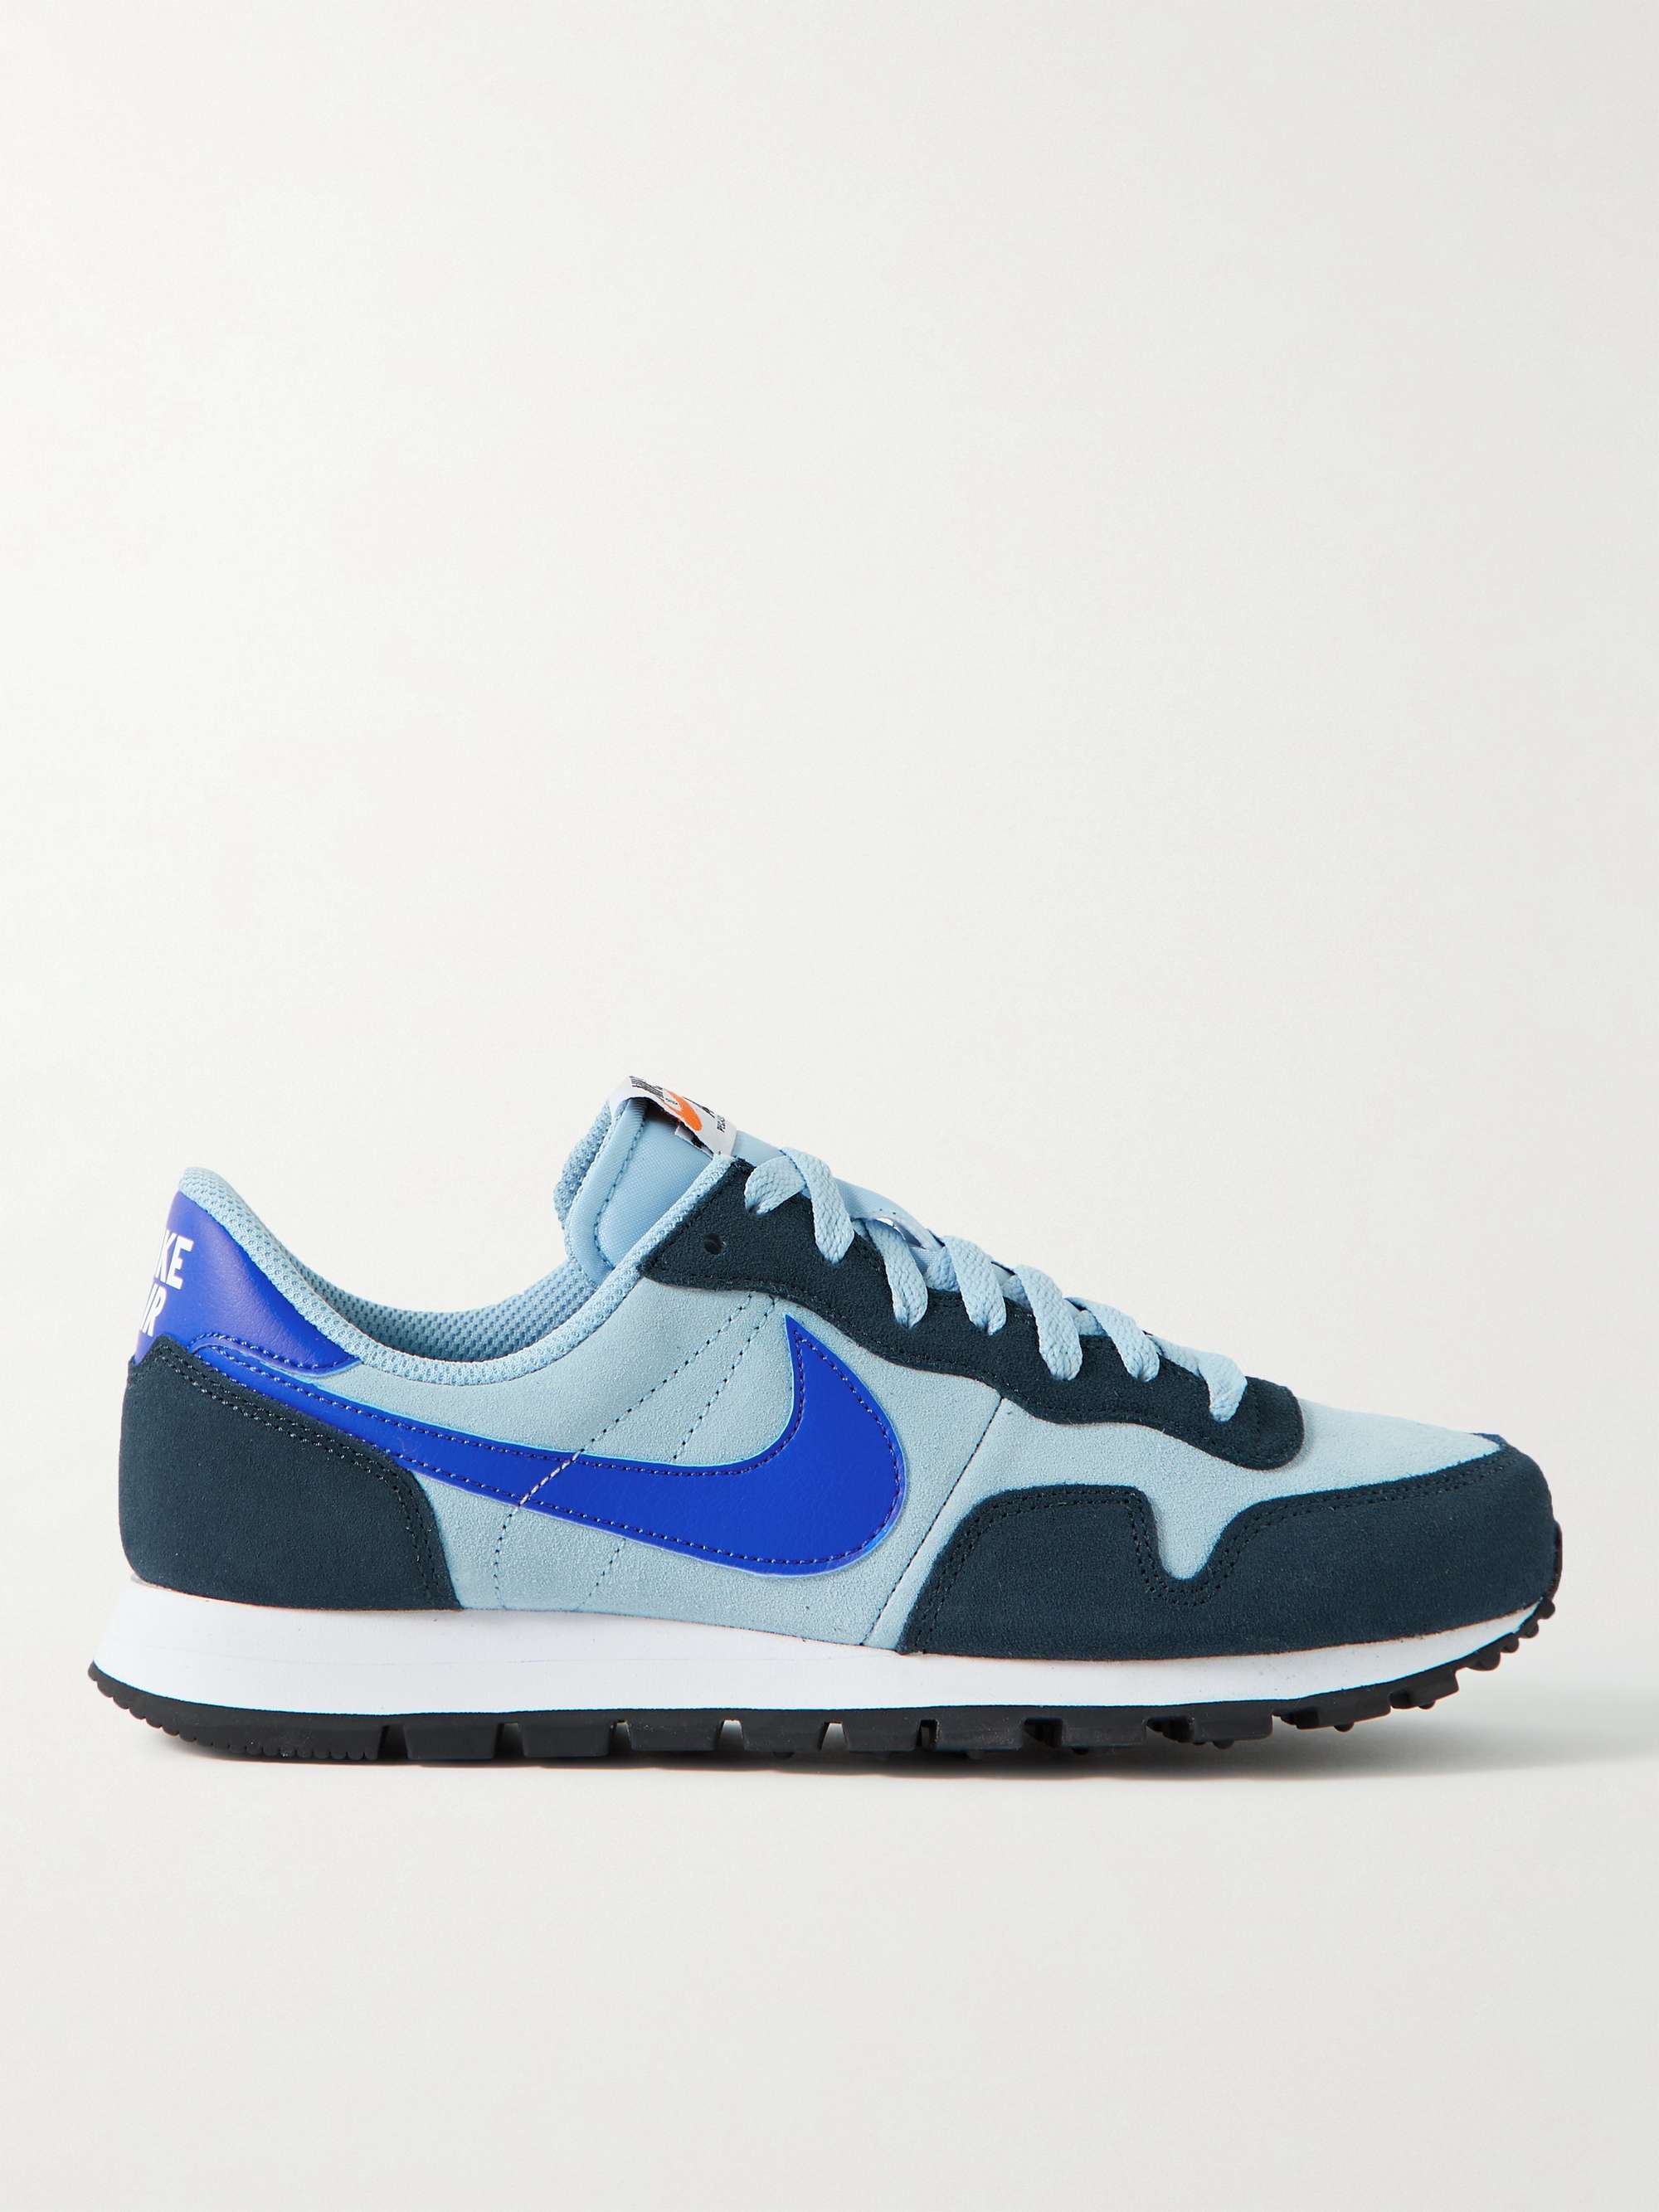 Blue Air Pegasus 83 Leather-Trimmed Suede Sneakers | NIKE | MR PORTER